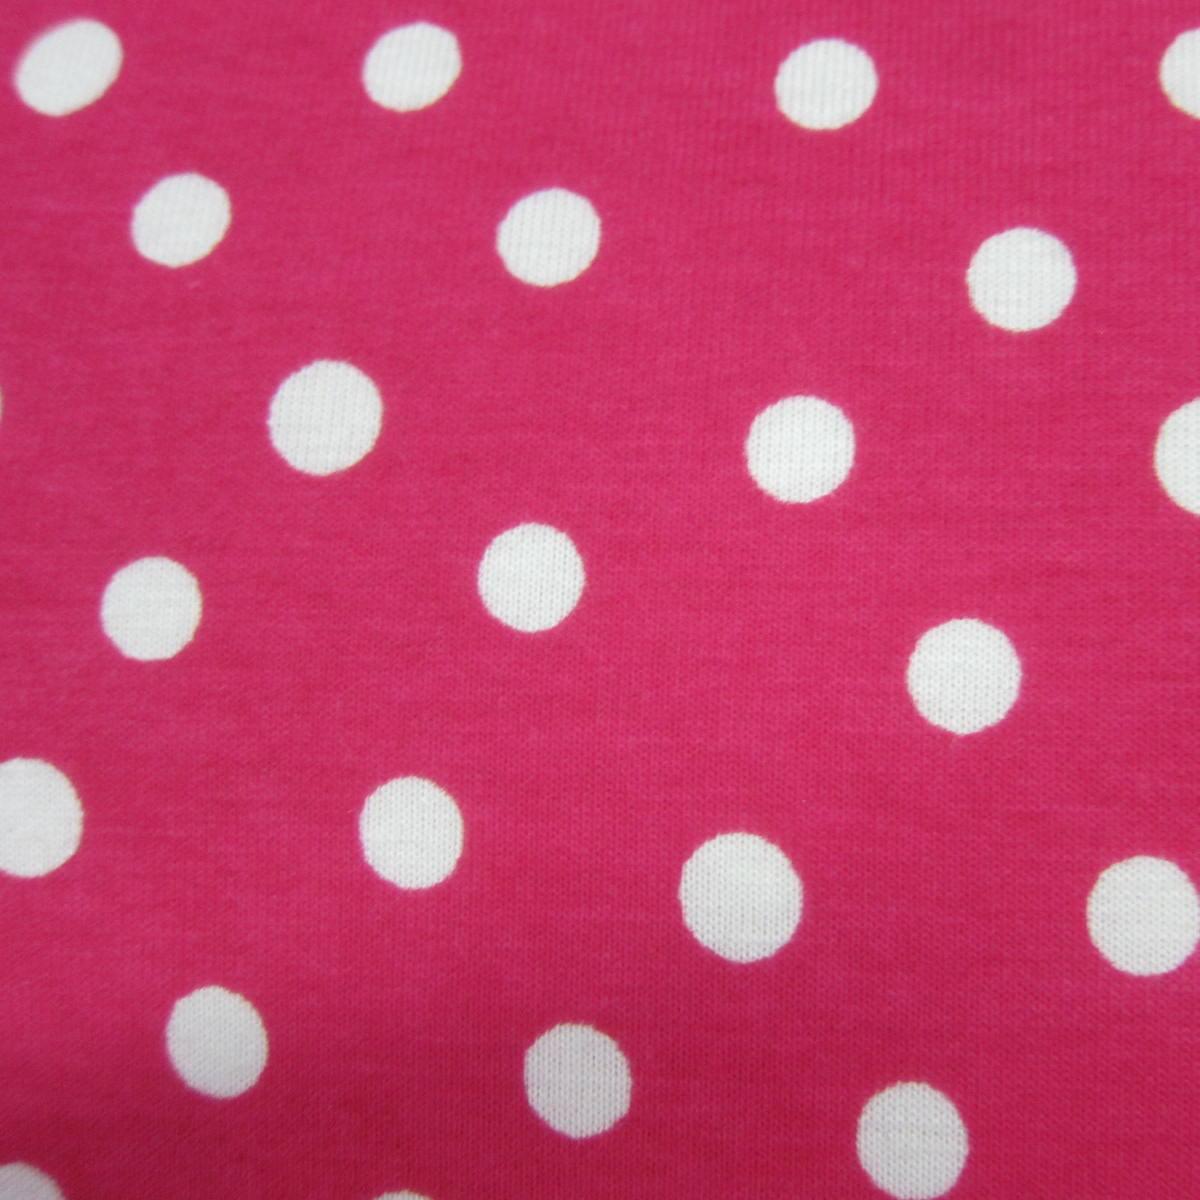 White Pencil Dots on Hot Pink Cotton Jersey